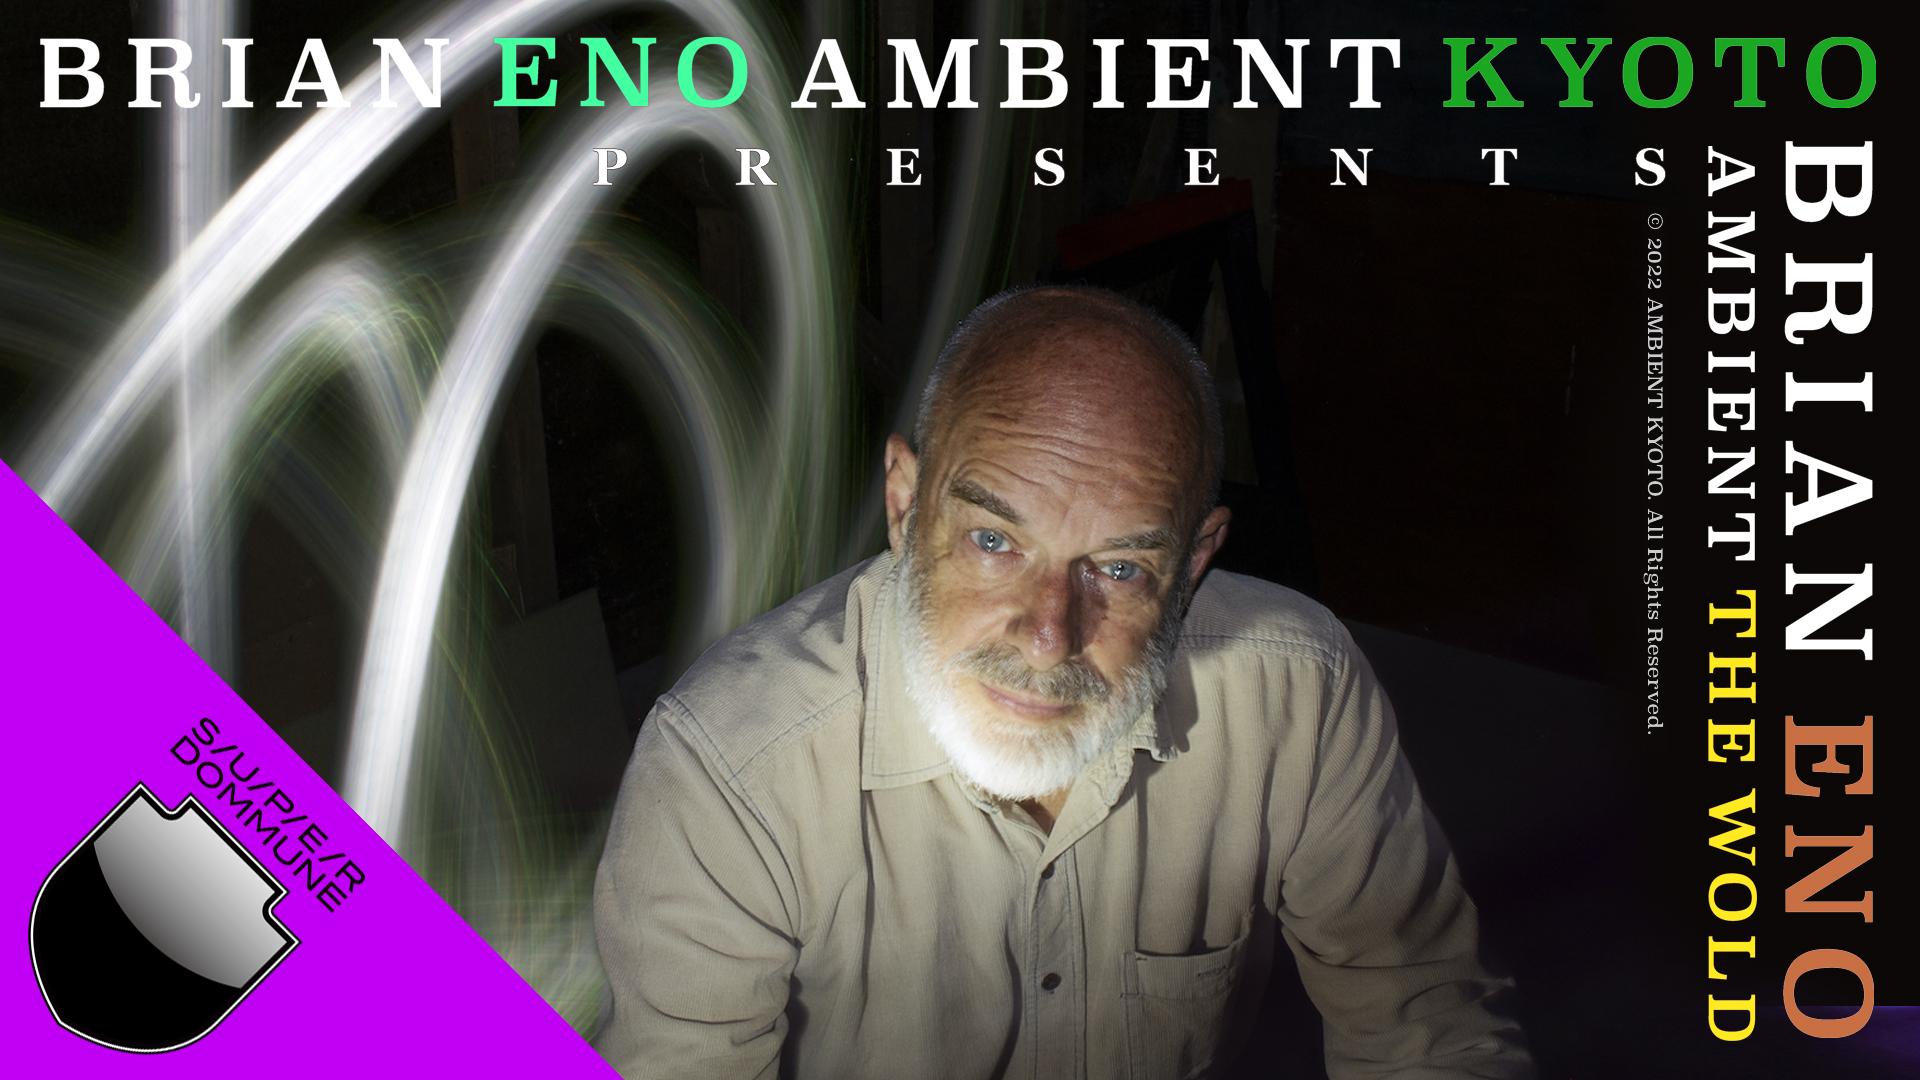 BRIAN ENO AMBIENT KYOTO」開催記念番組 BRIAN ENO「AMBIENT THE WORLD」 - DOMMUNE